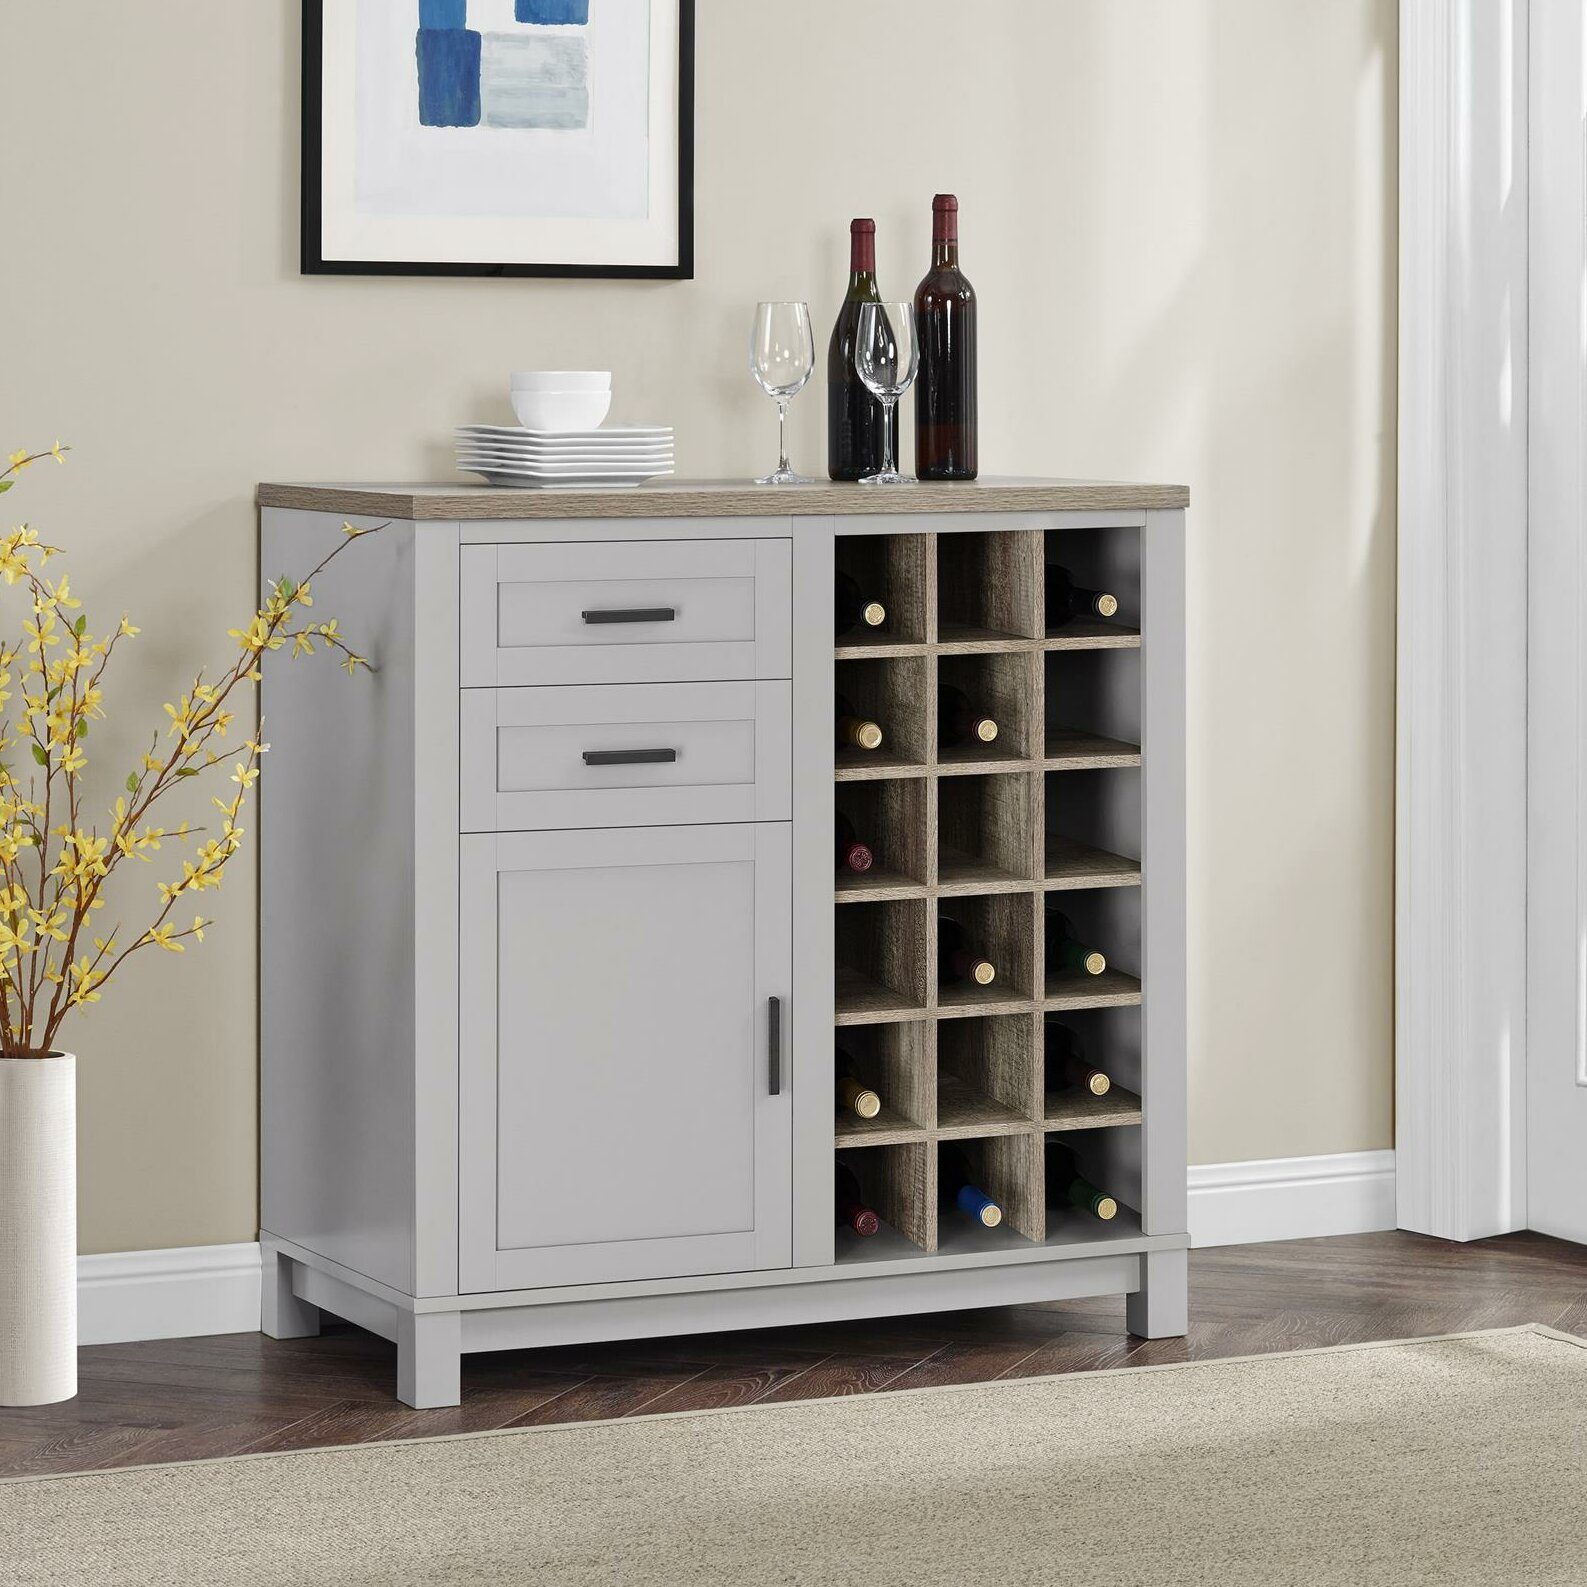 Bar Wine Cabinets Youll Love In 2019 Wayfair with regard to measurements 1587 X 1587